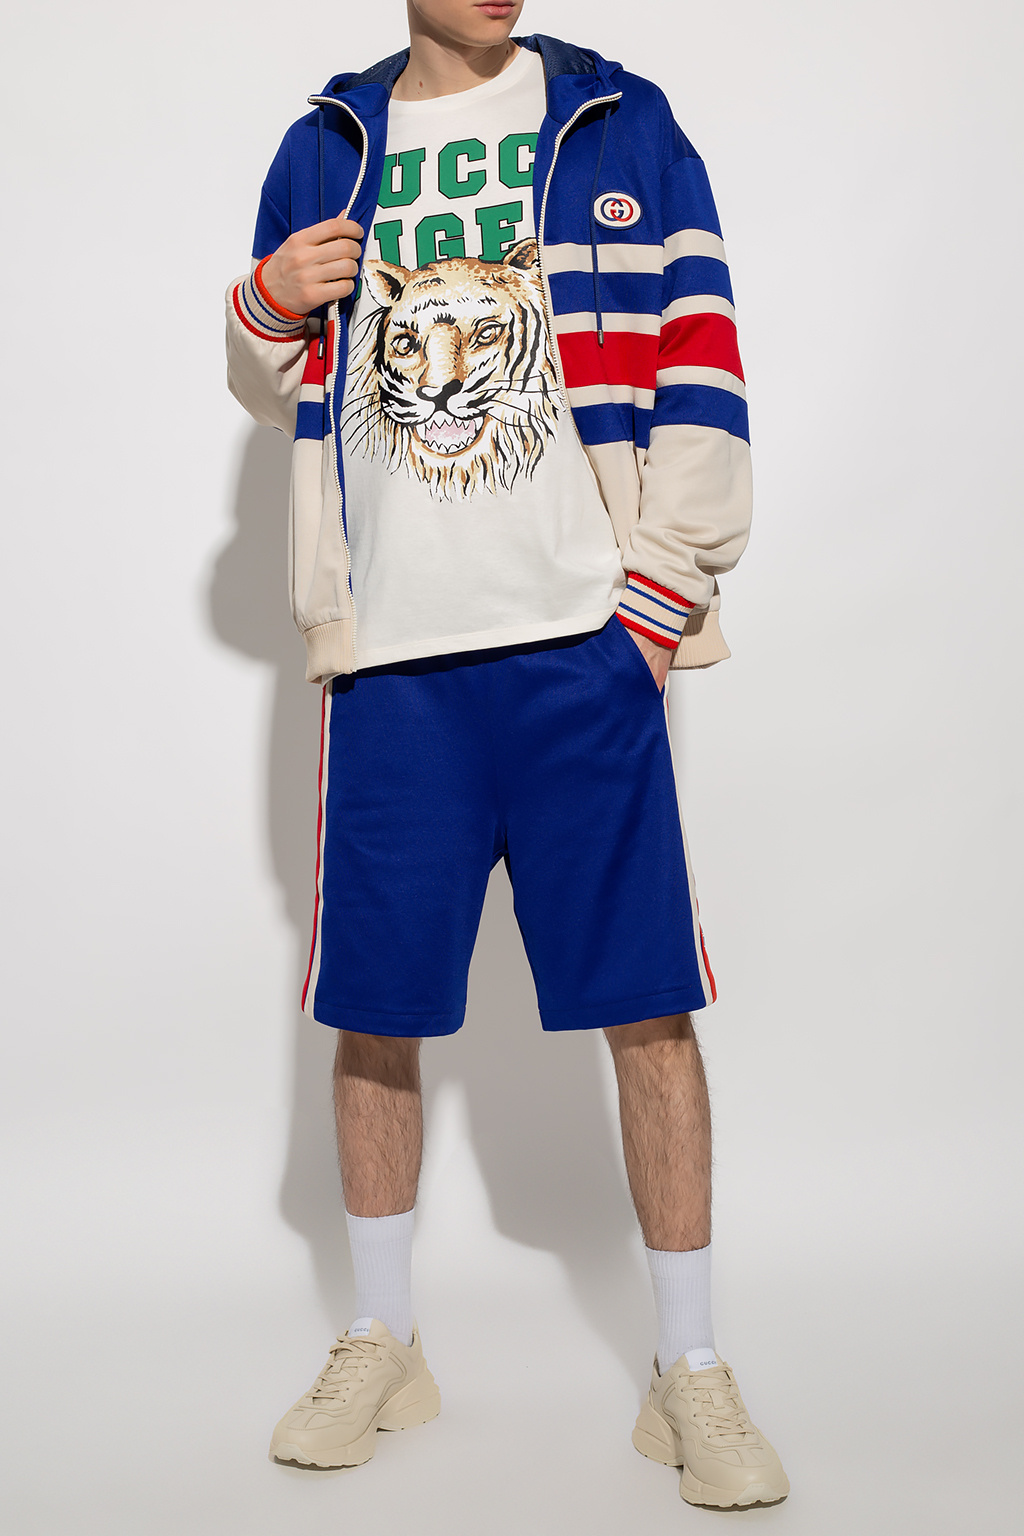 Gucci Hoodie from the ‘Gucci Tiger’ collection